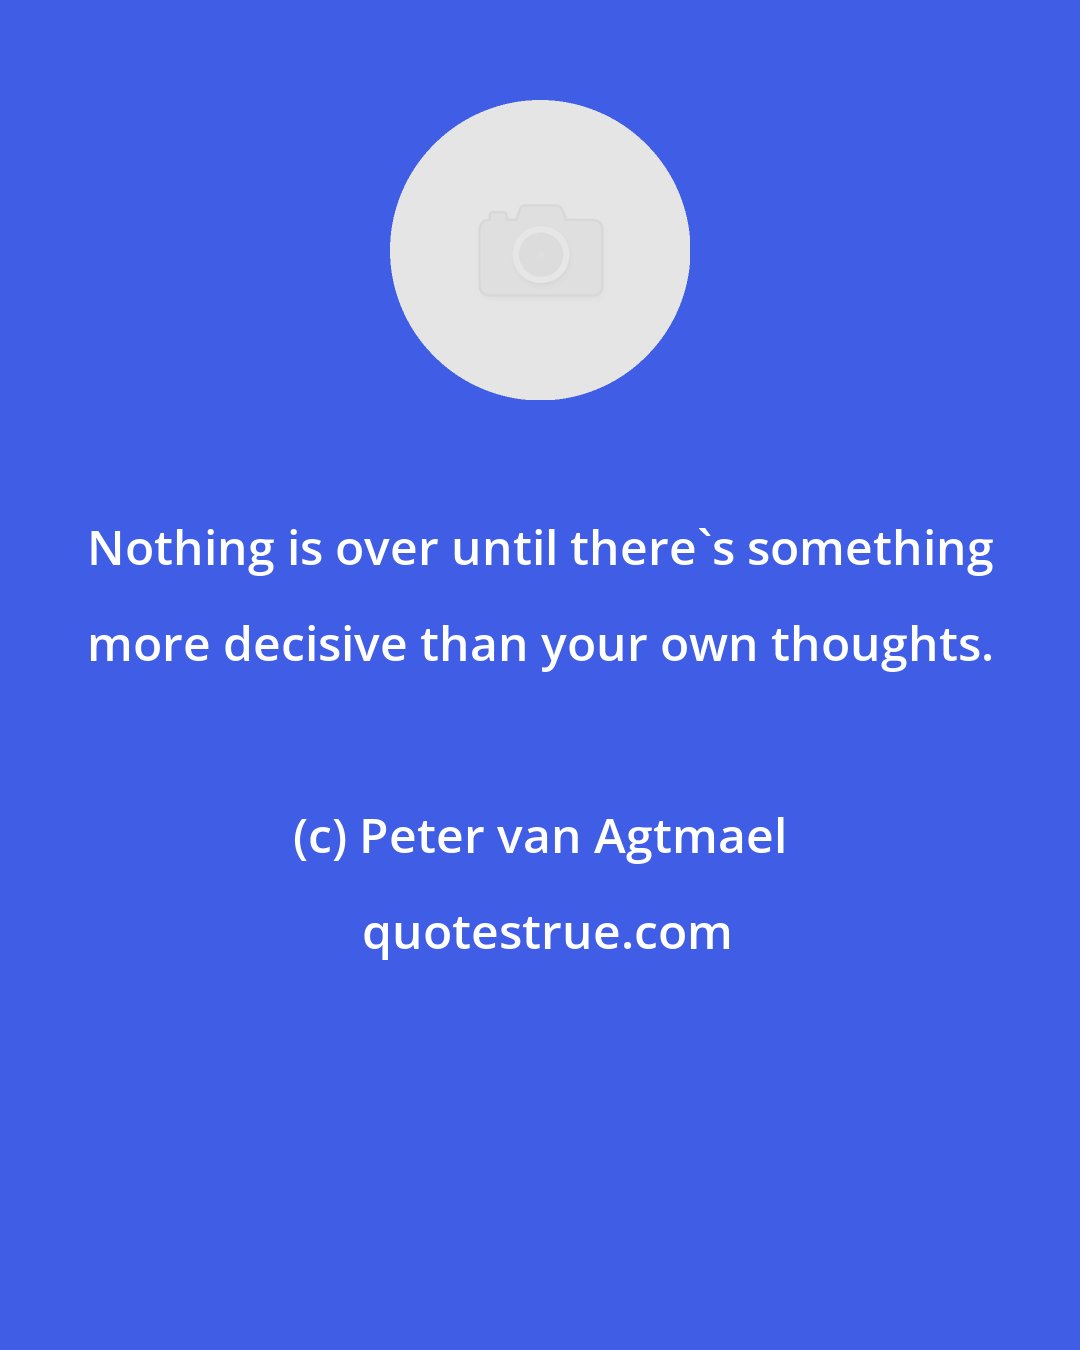 Peter van Agtmael: Nothing is over until there's something more decisive than your own thoughts.